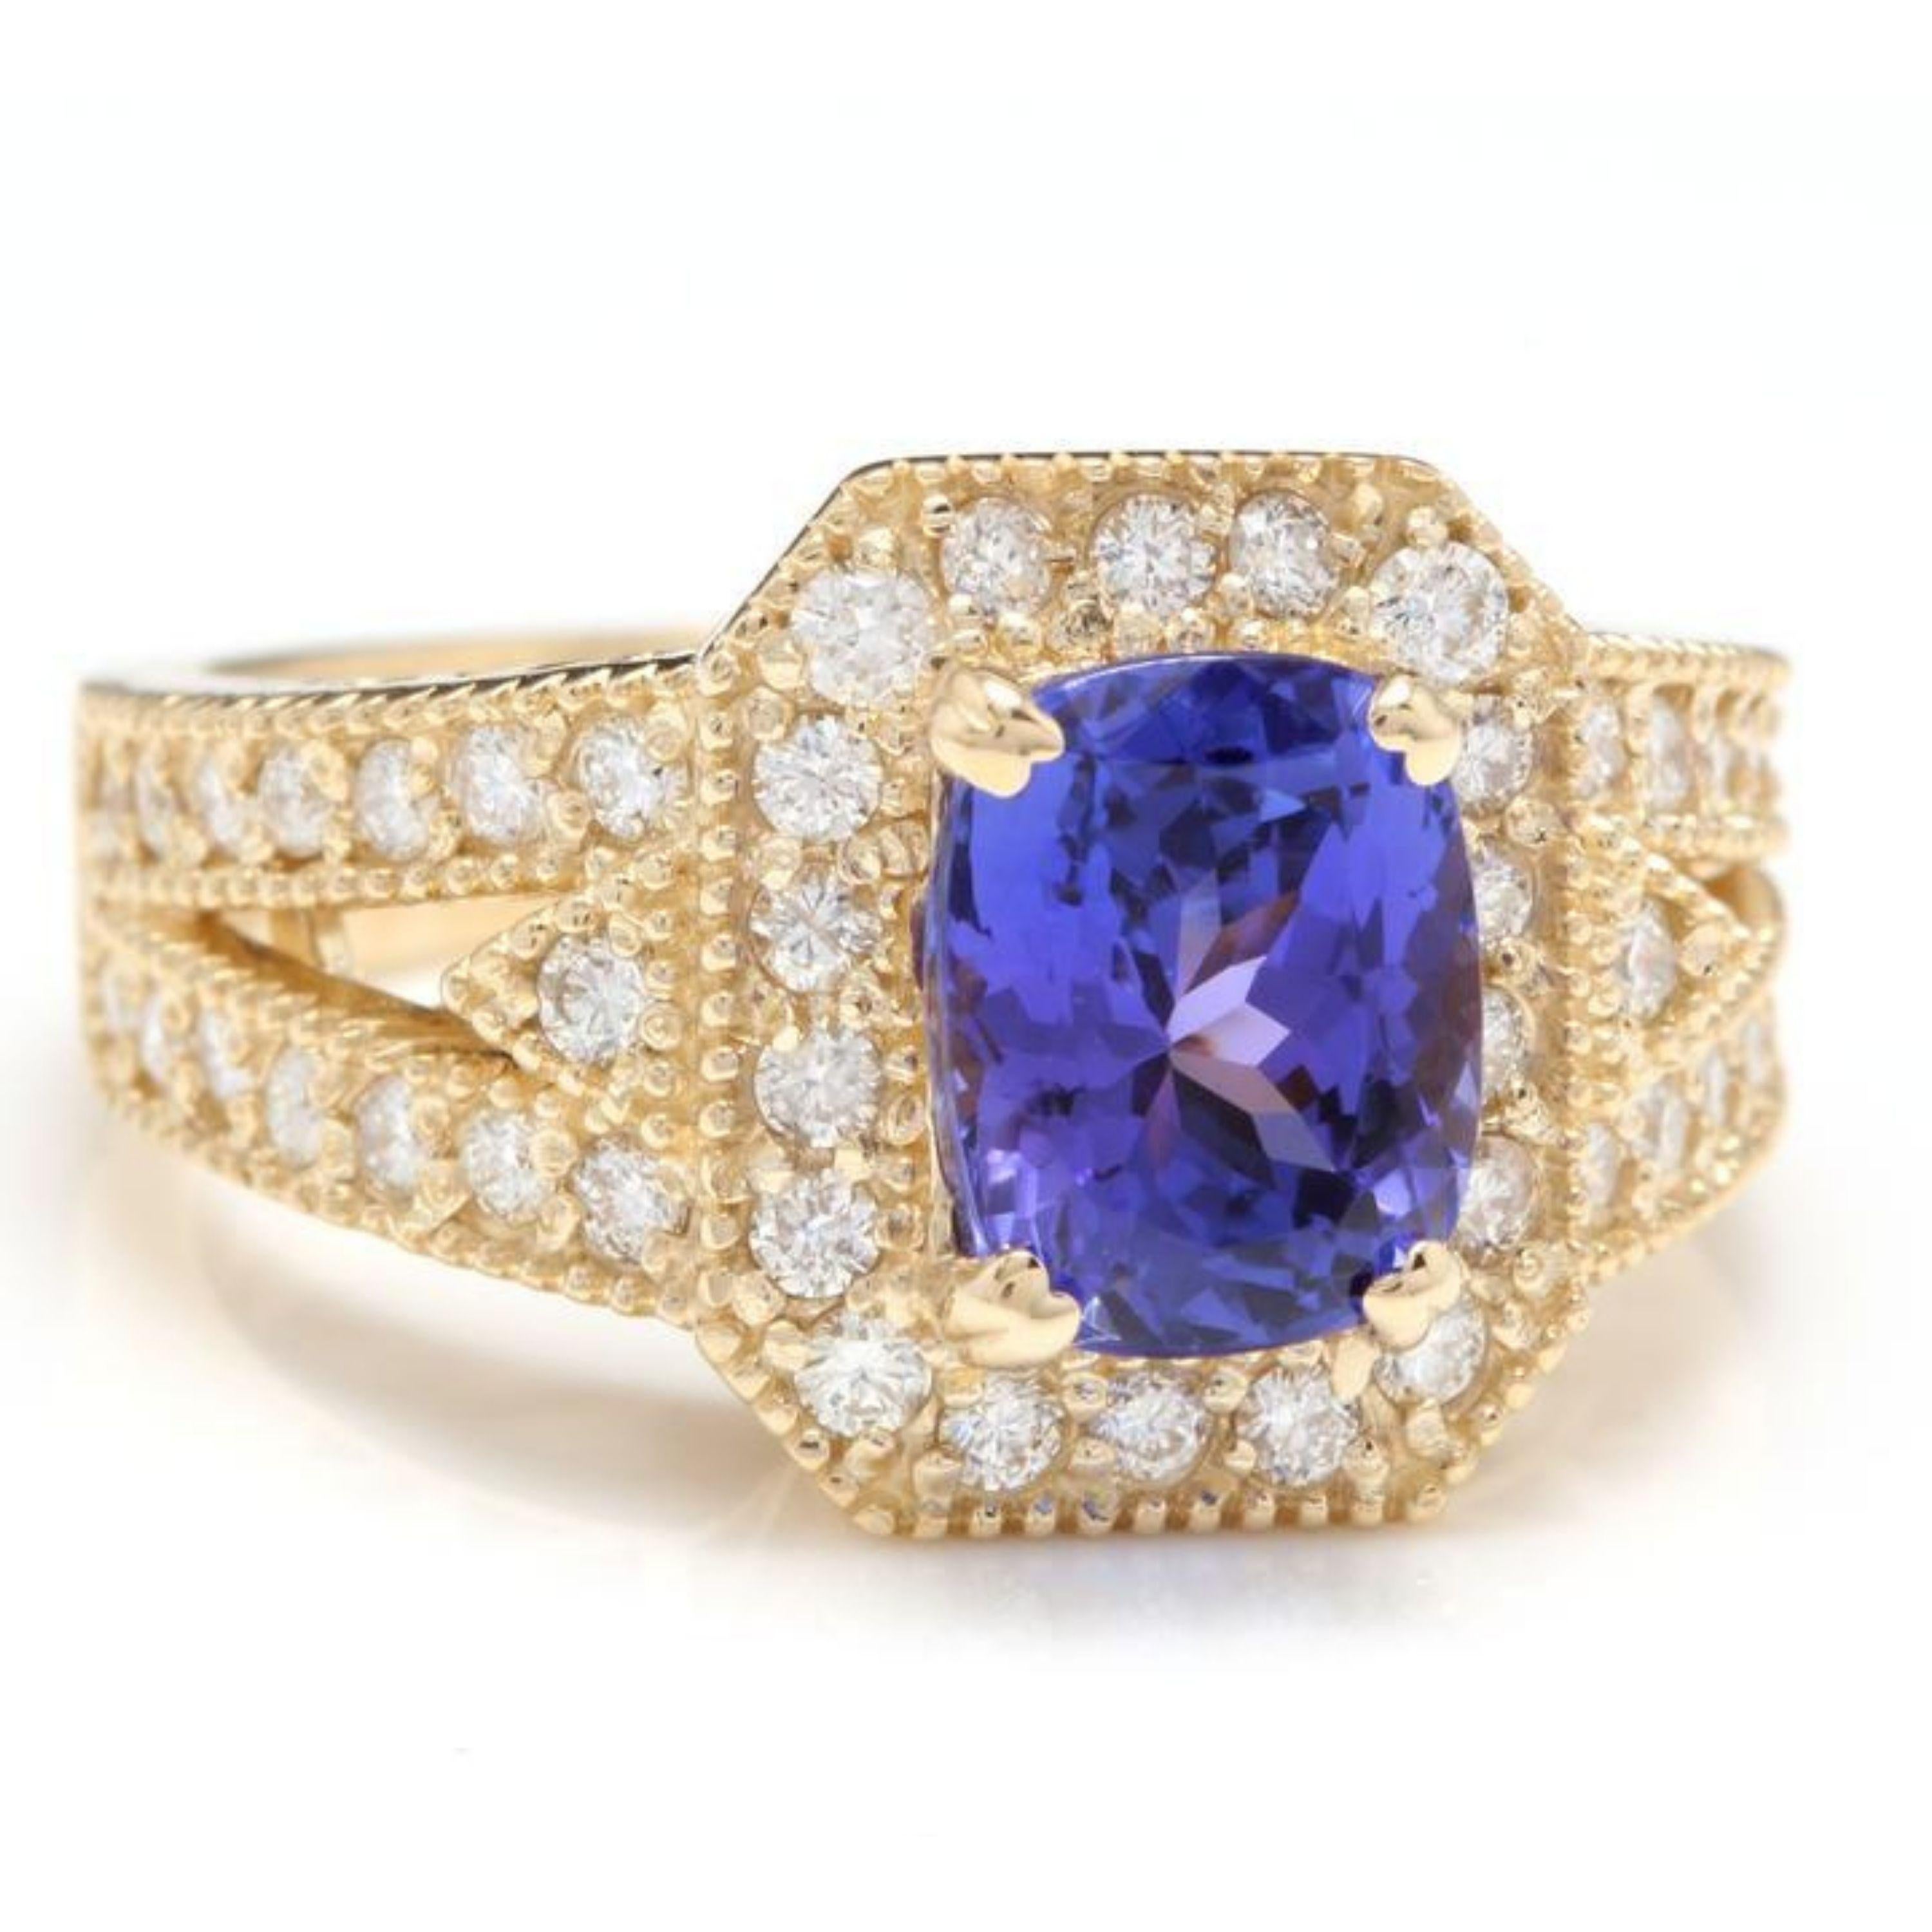 3.60 Carats Natural Very Nice Looking Tanzanite and Diamond 14K Solid Yellow Gold Ring

Total Natural Oval Cut Tanzanite Weight is: Approx. 2.50 Carats

Tanzanite Measures: Approx. 9.00mm x 7.00mm

Tanzanite Treatment: Heat

Natural Round Diamonds